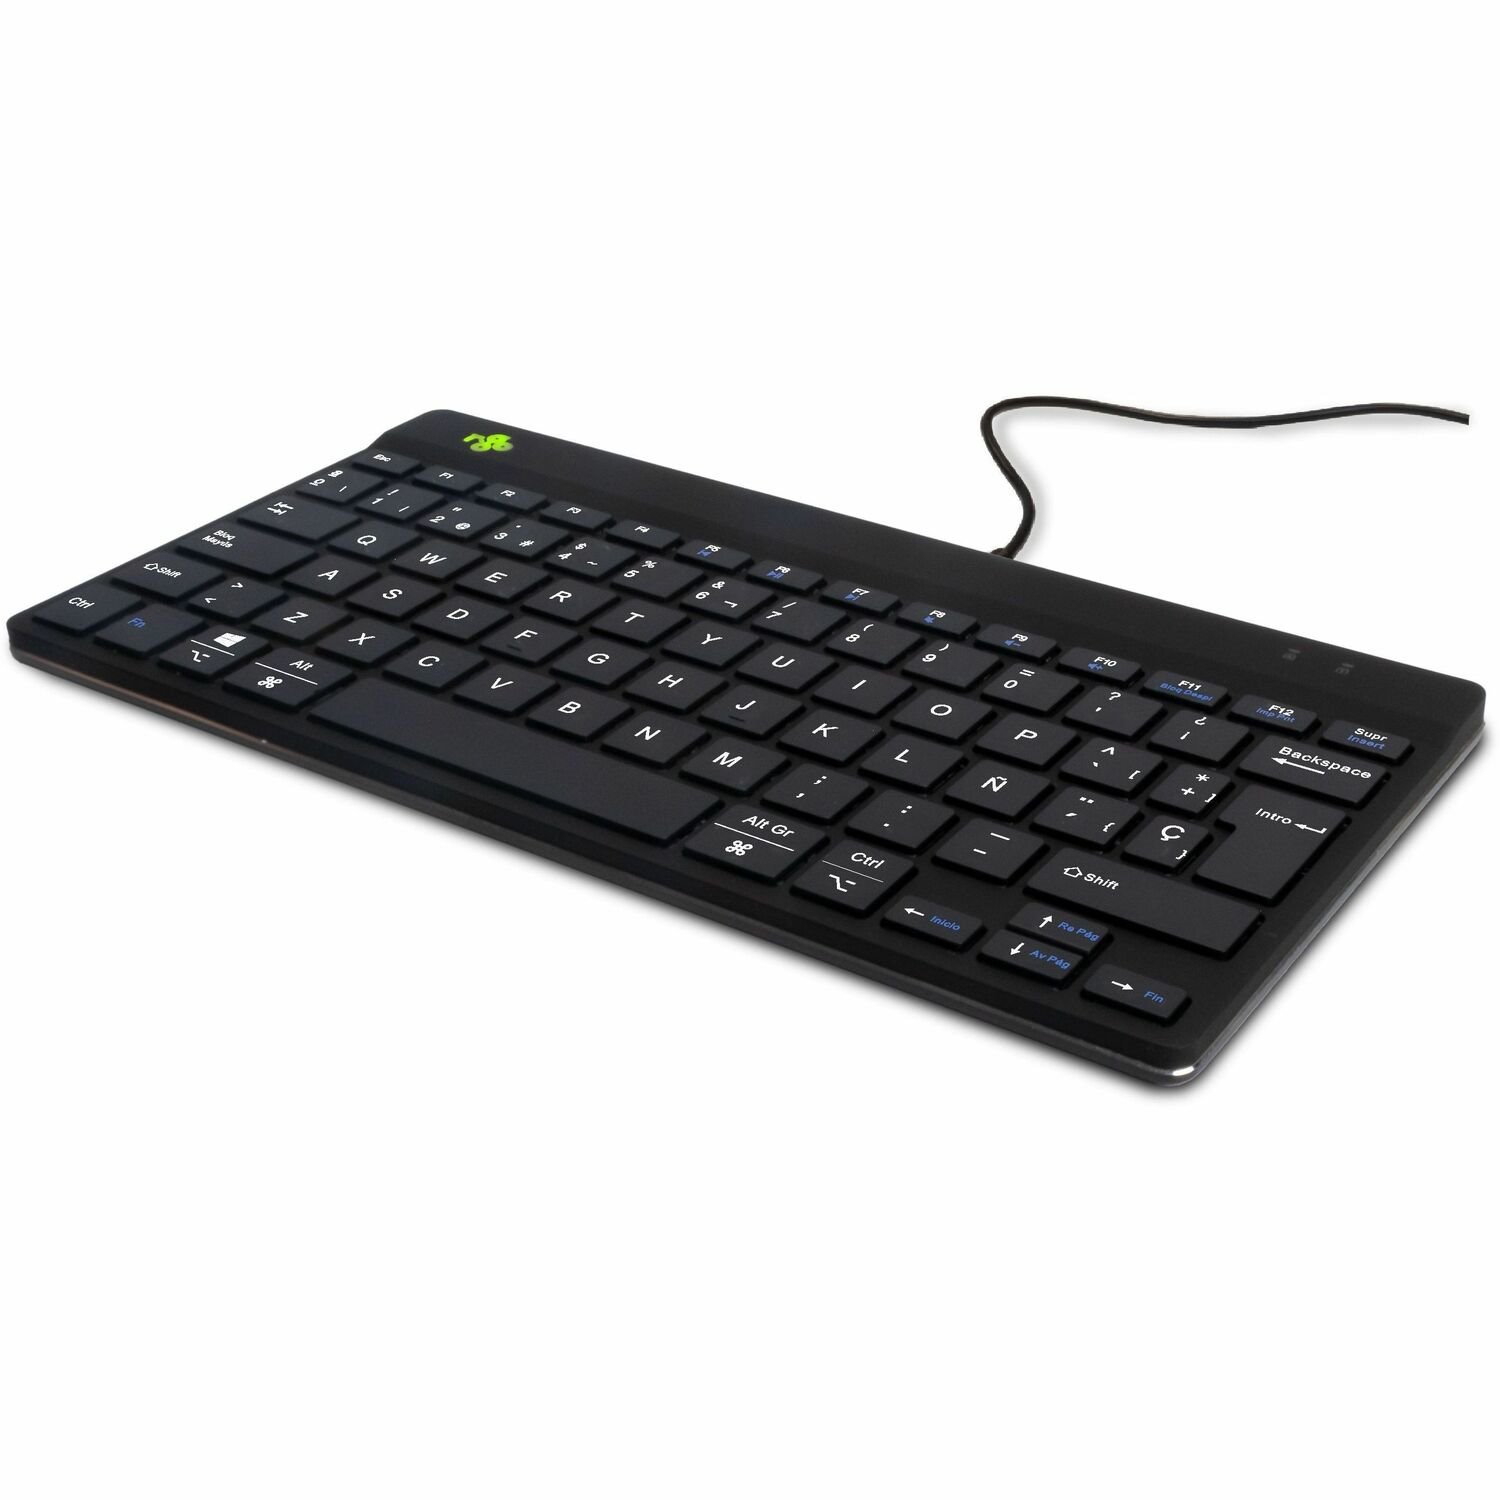 R-Go Compact Break Keyboard - Cable Connectivity - USB Interface - Spanish - QWERTY Layout - Black